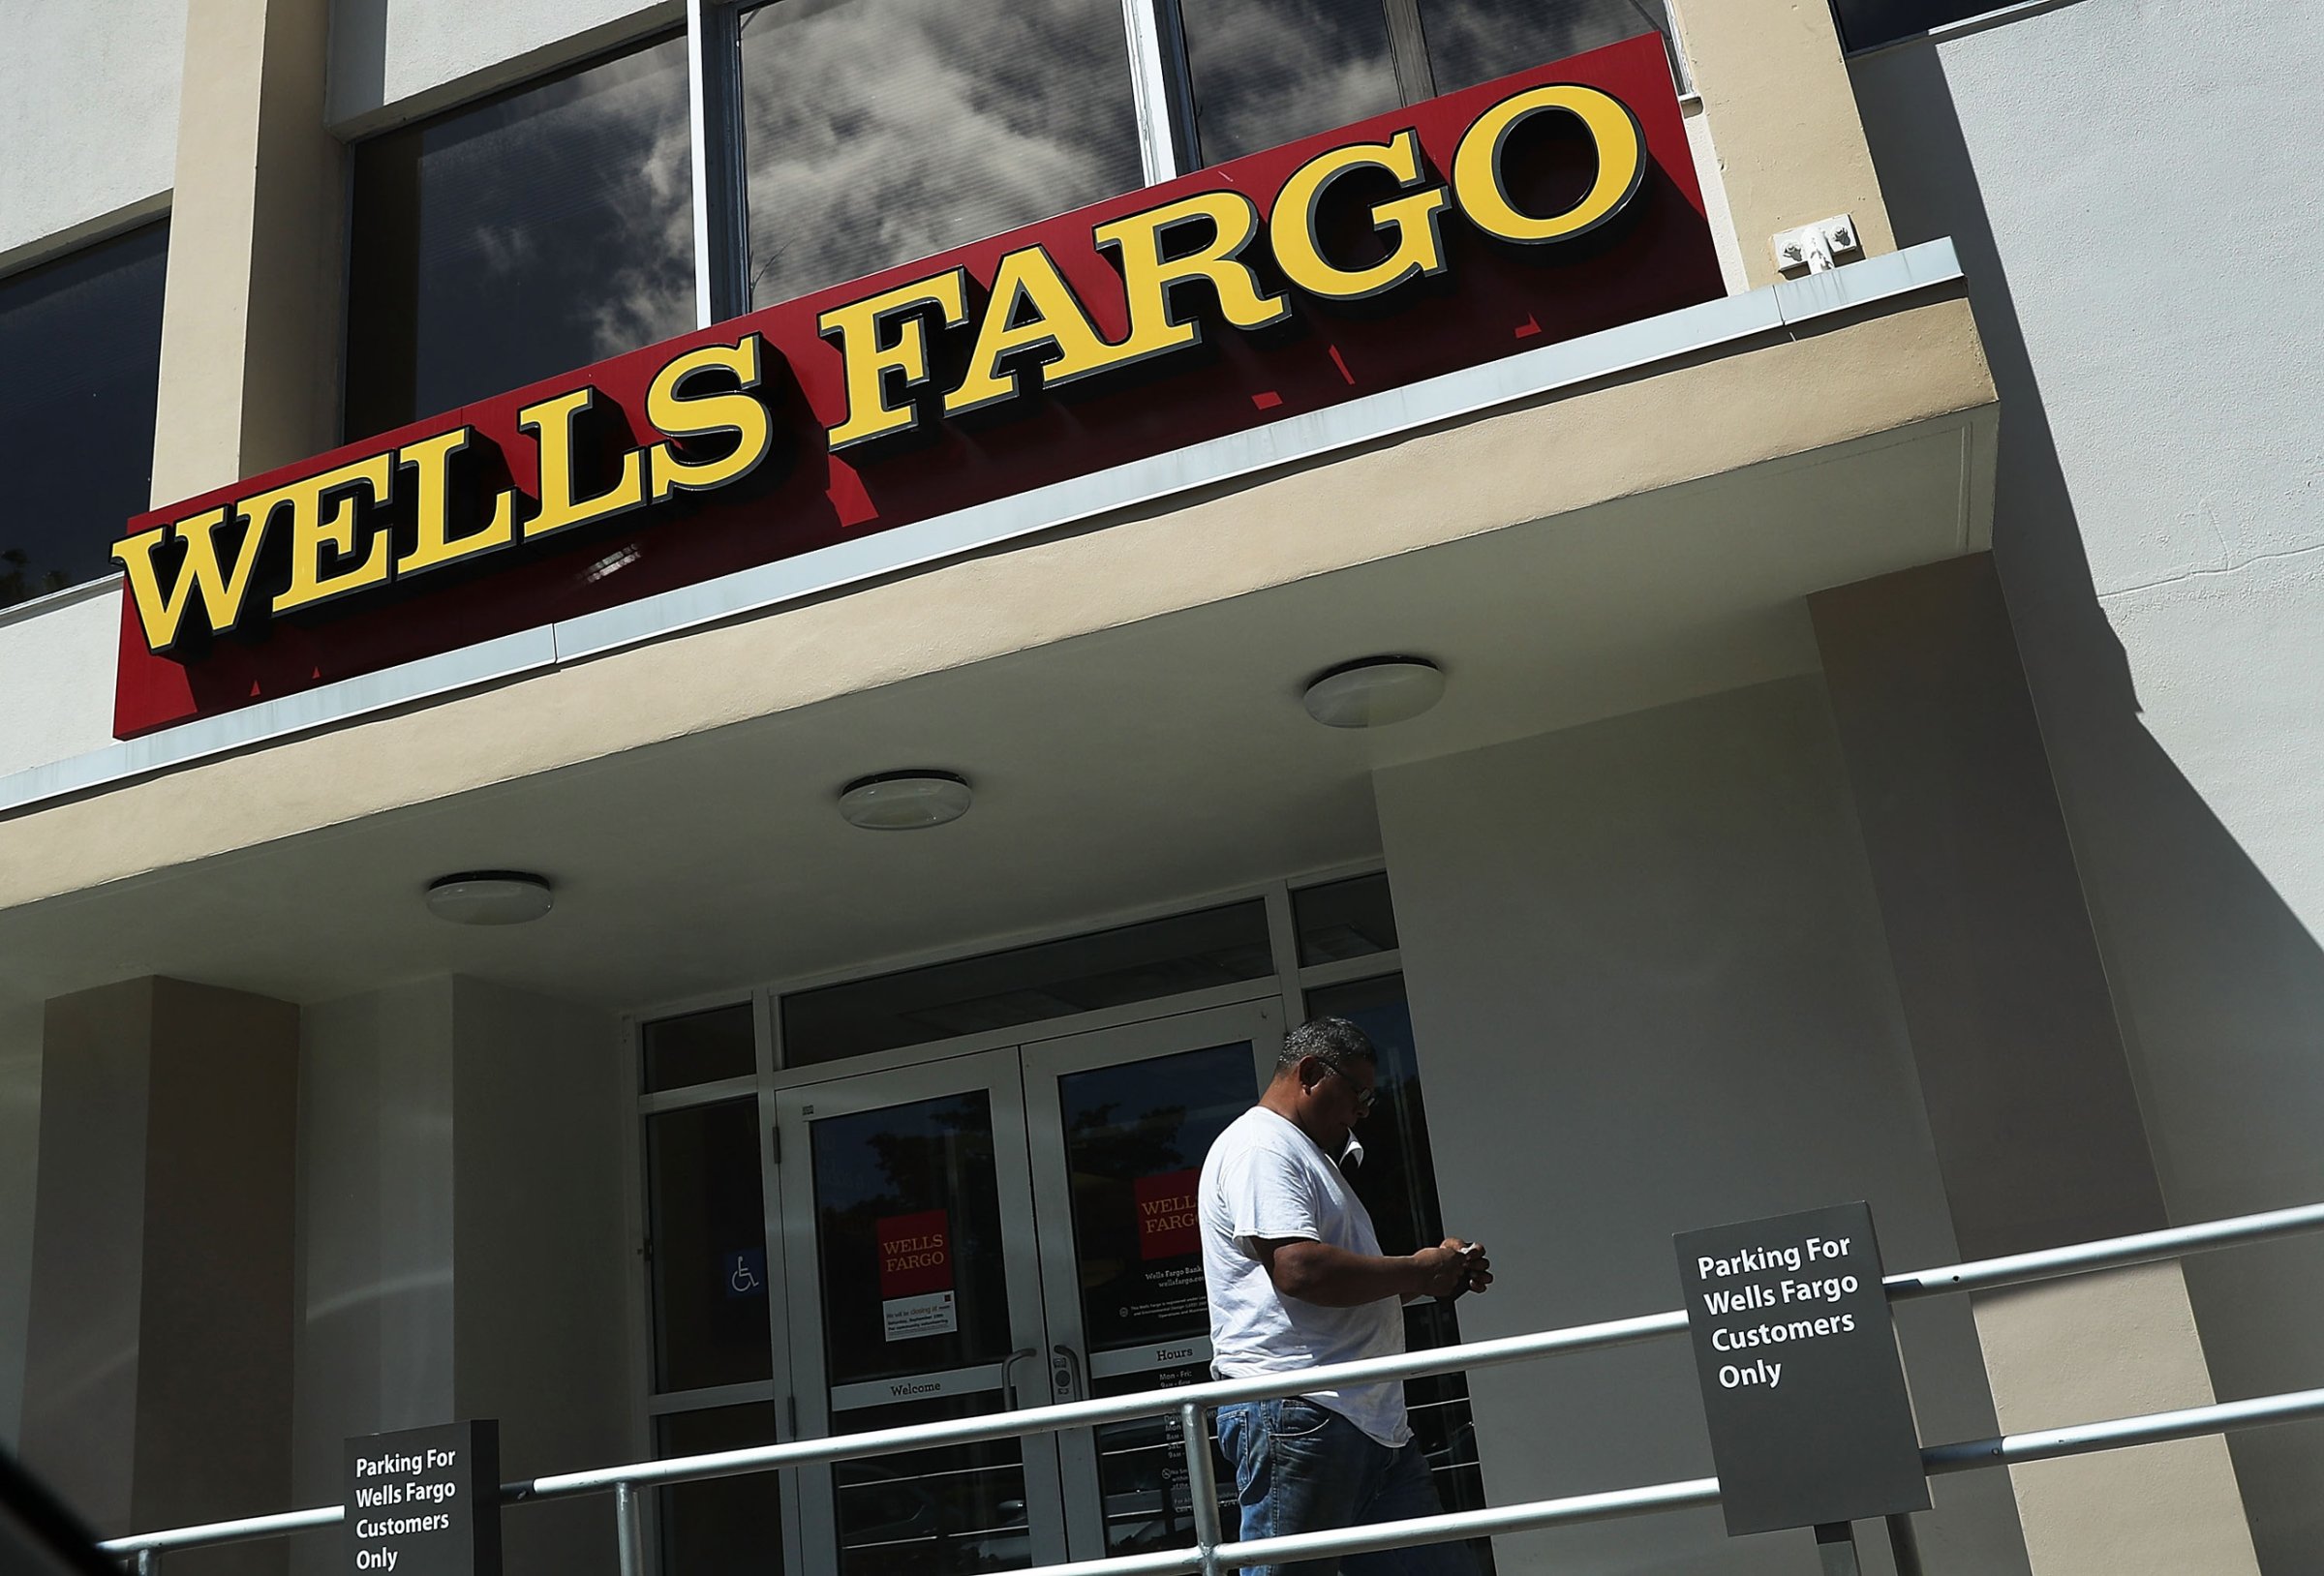 A Wells Fargo sign is seen on the exterior of one of their bank branches in Miami on September 9, 2016.